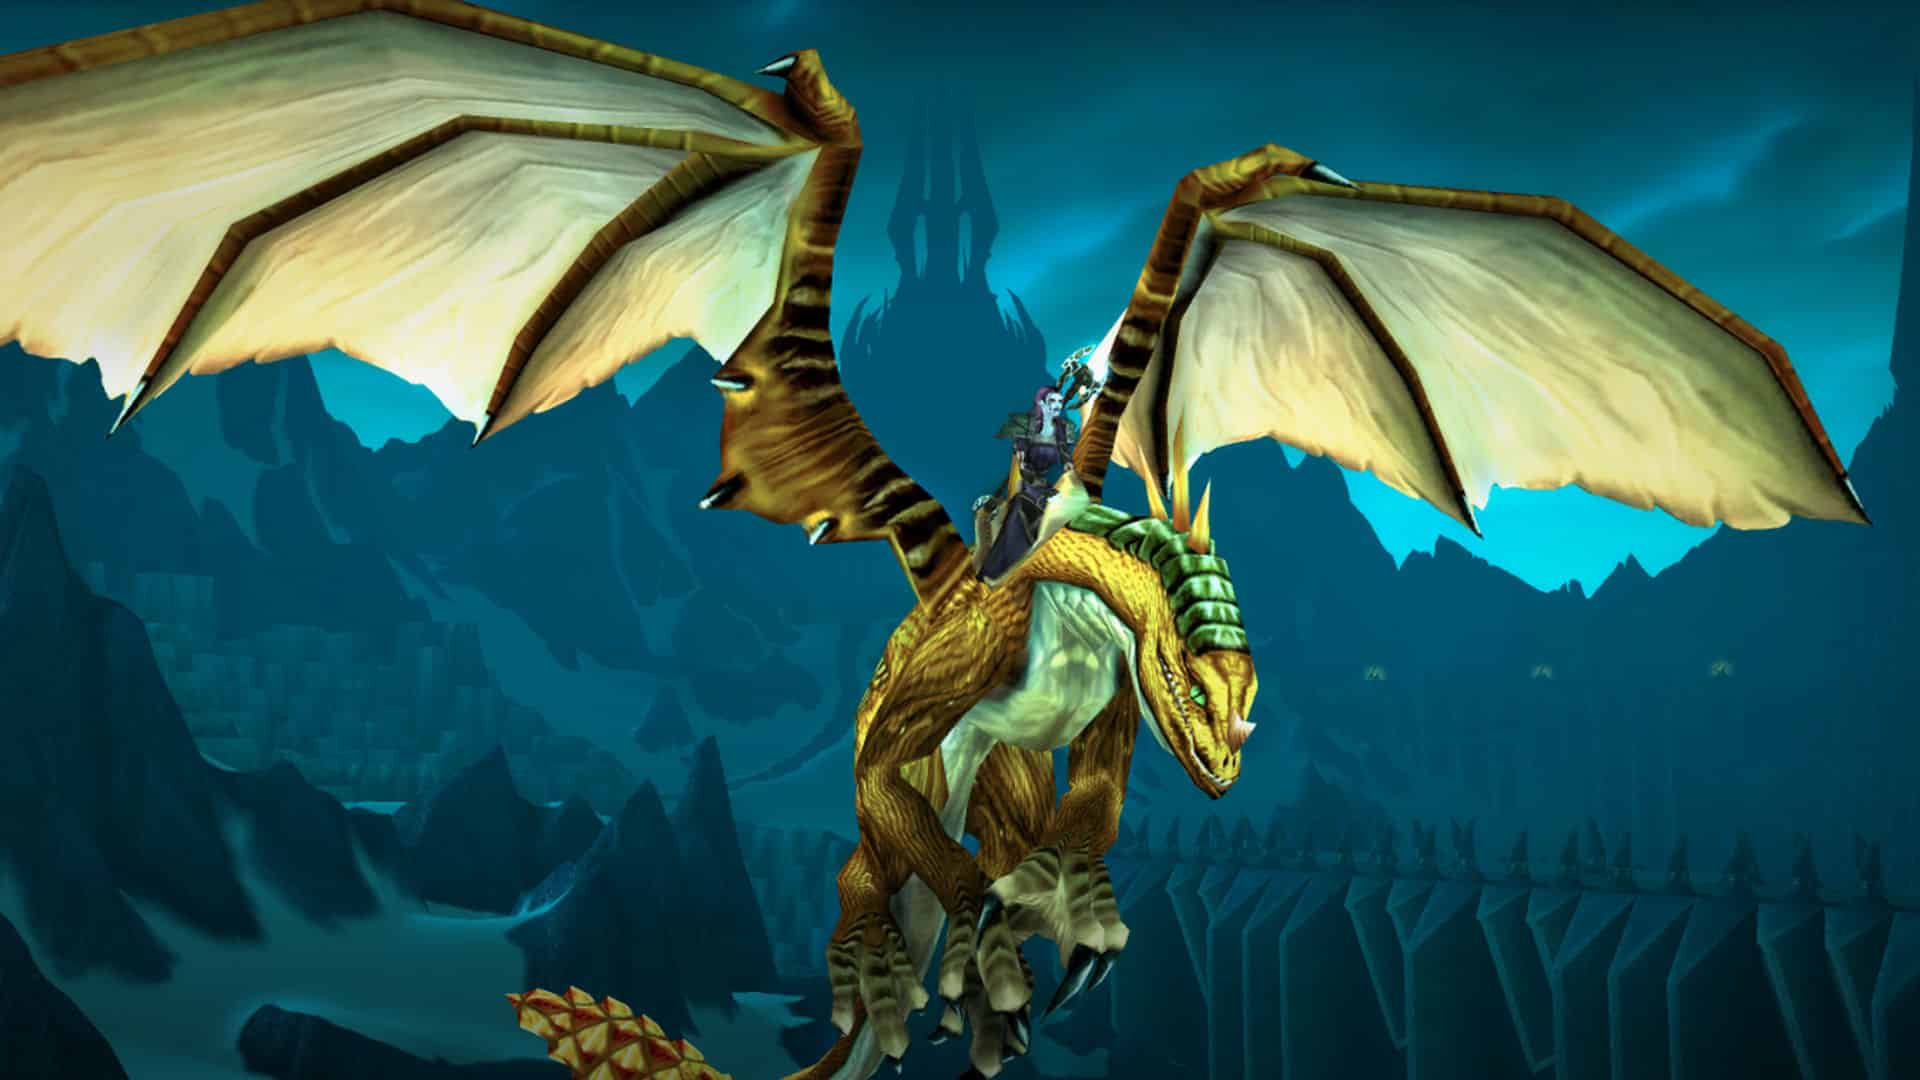 WoW Mobile: Blizzard is said to have stopped the mobile game